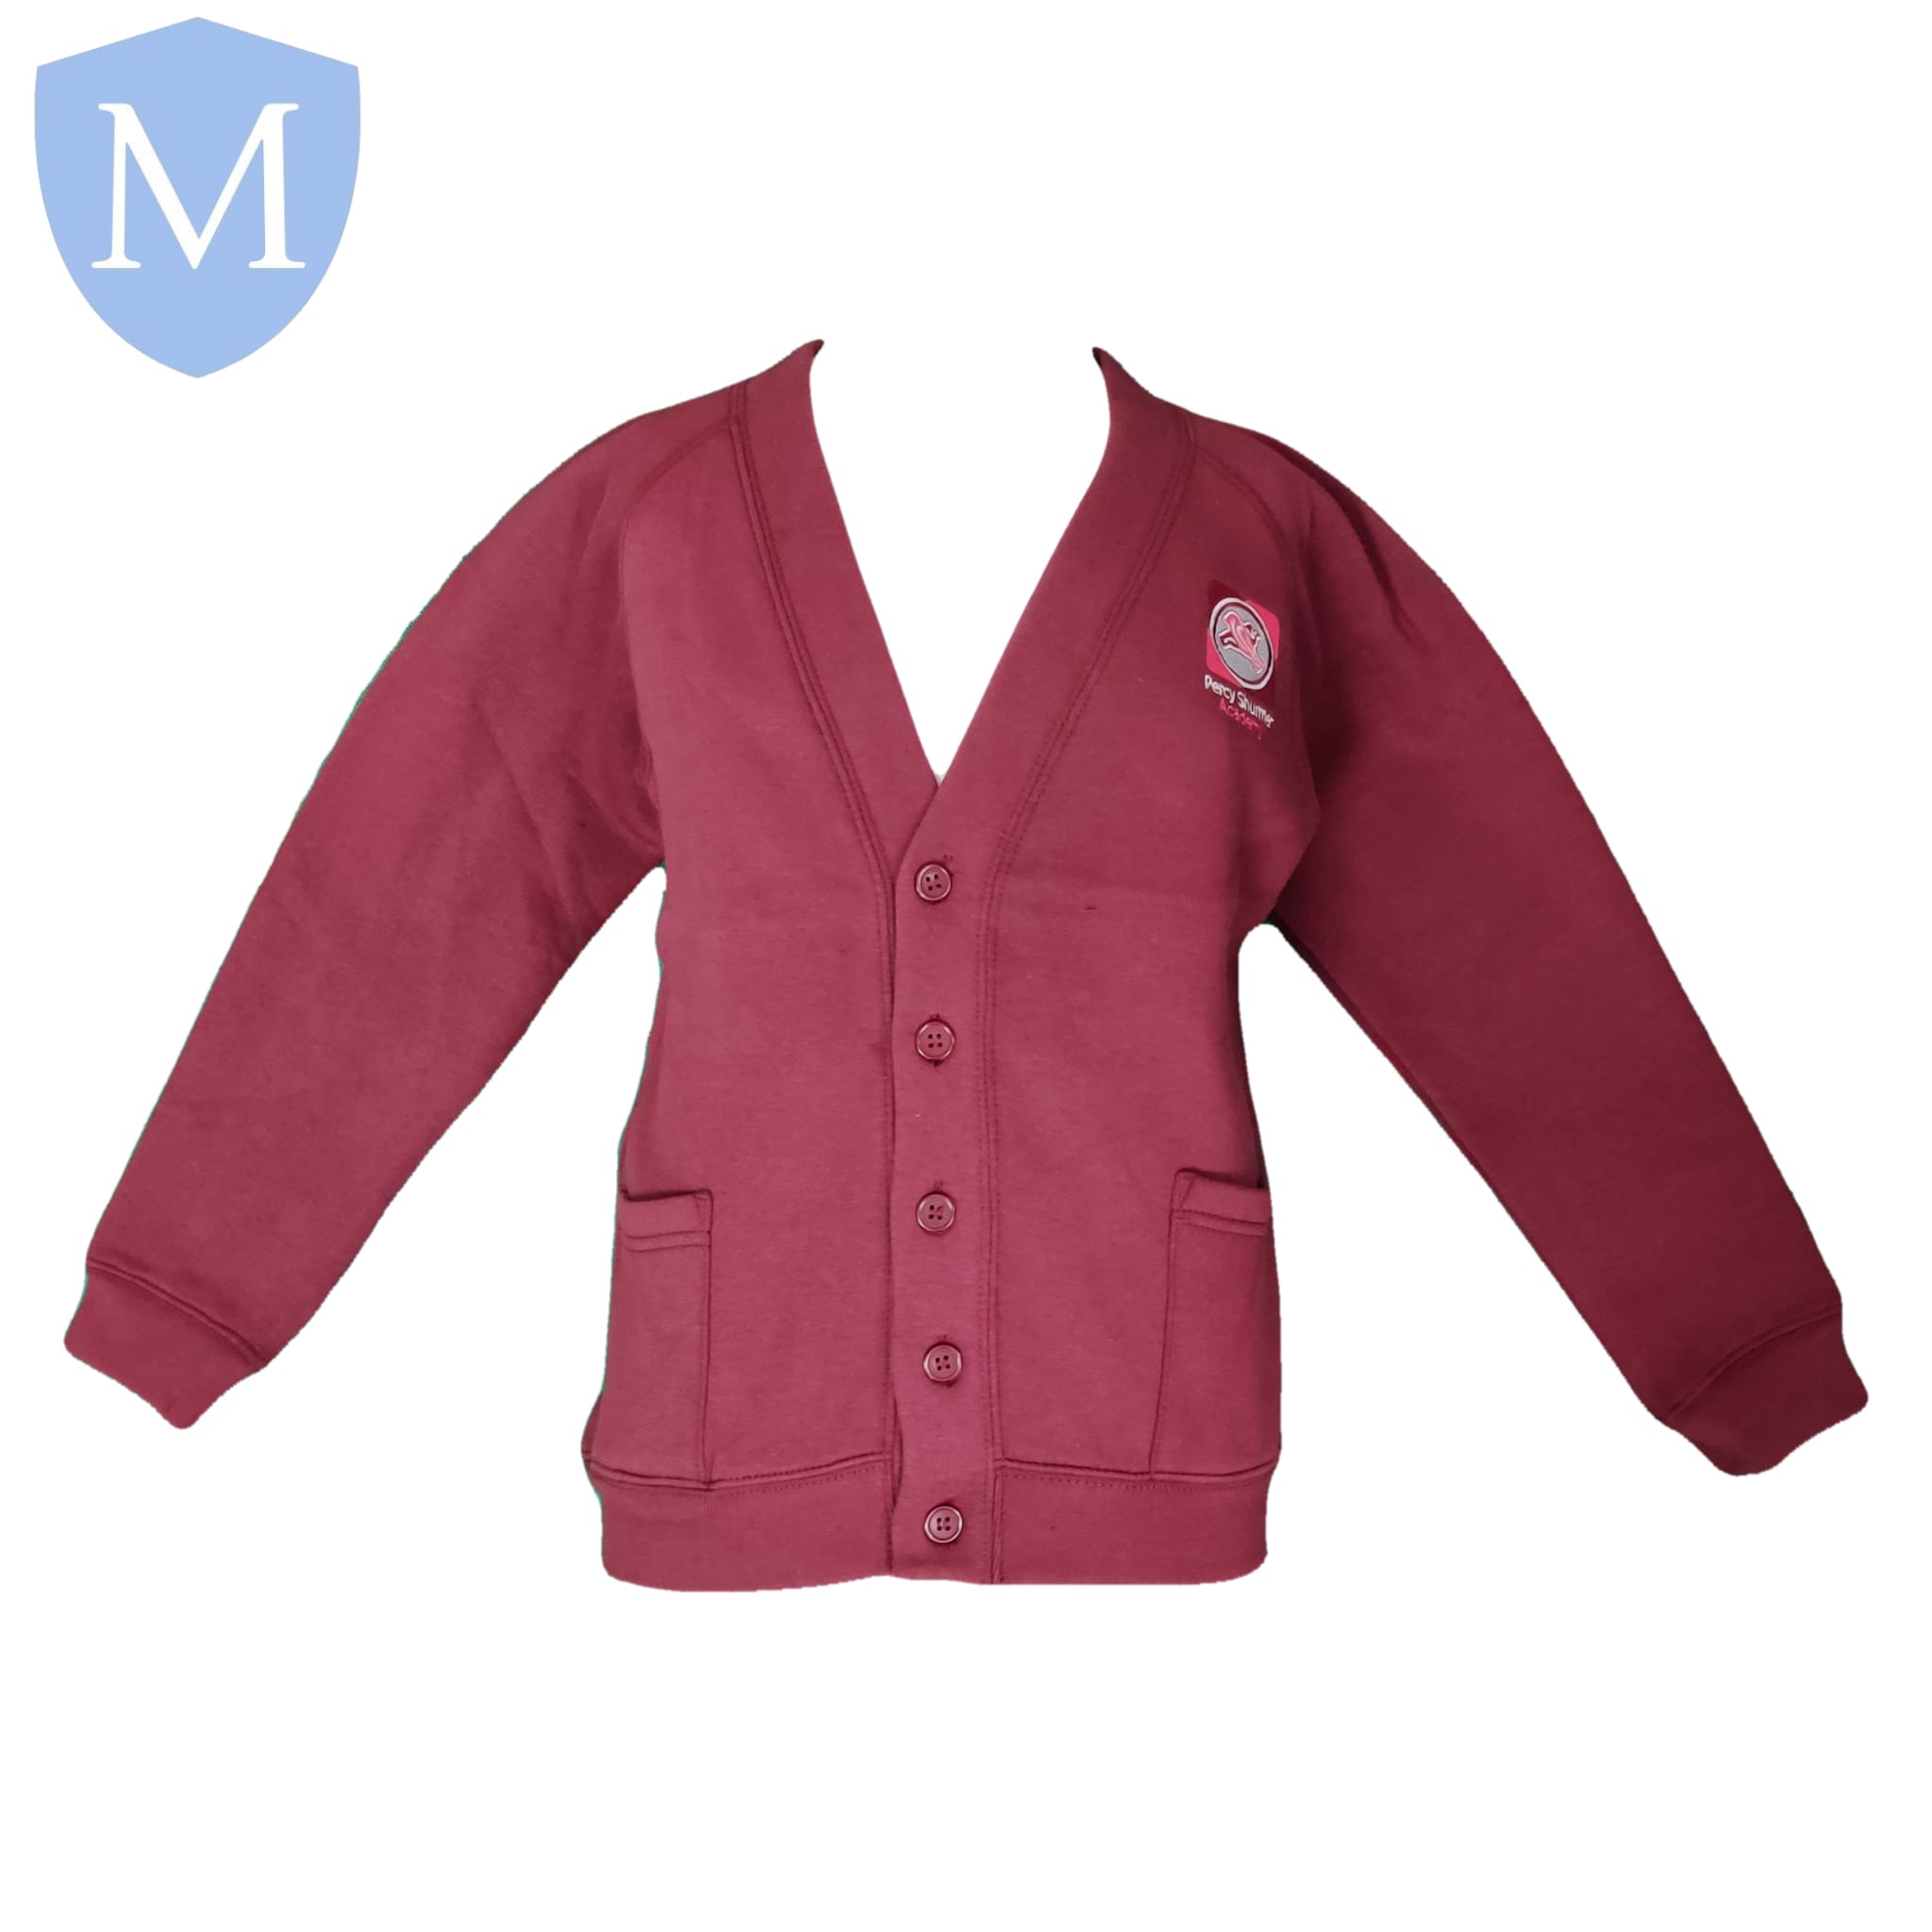 Percy Shurmer Academy Cardigan 11-12,13,2-3,3-4,5-6,7-8,9-10,Large,Med,Small,X-Large